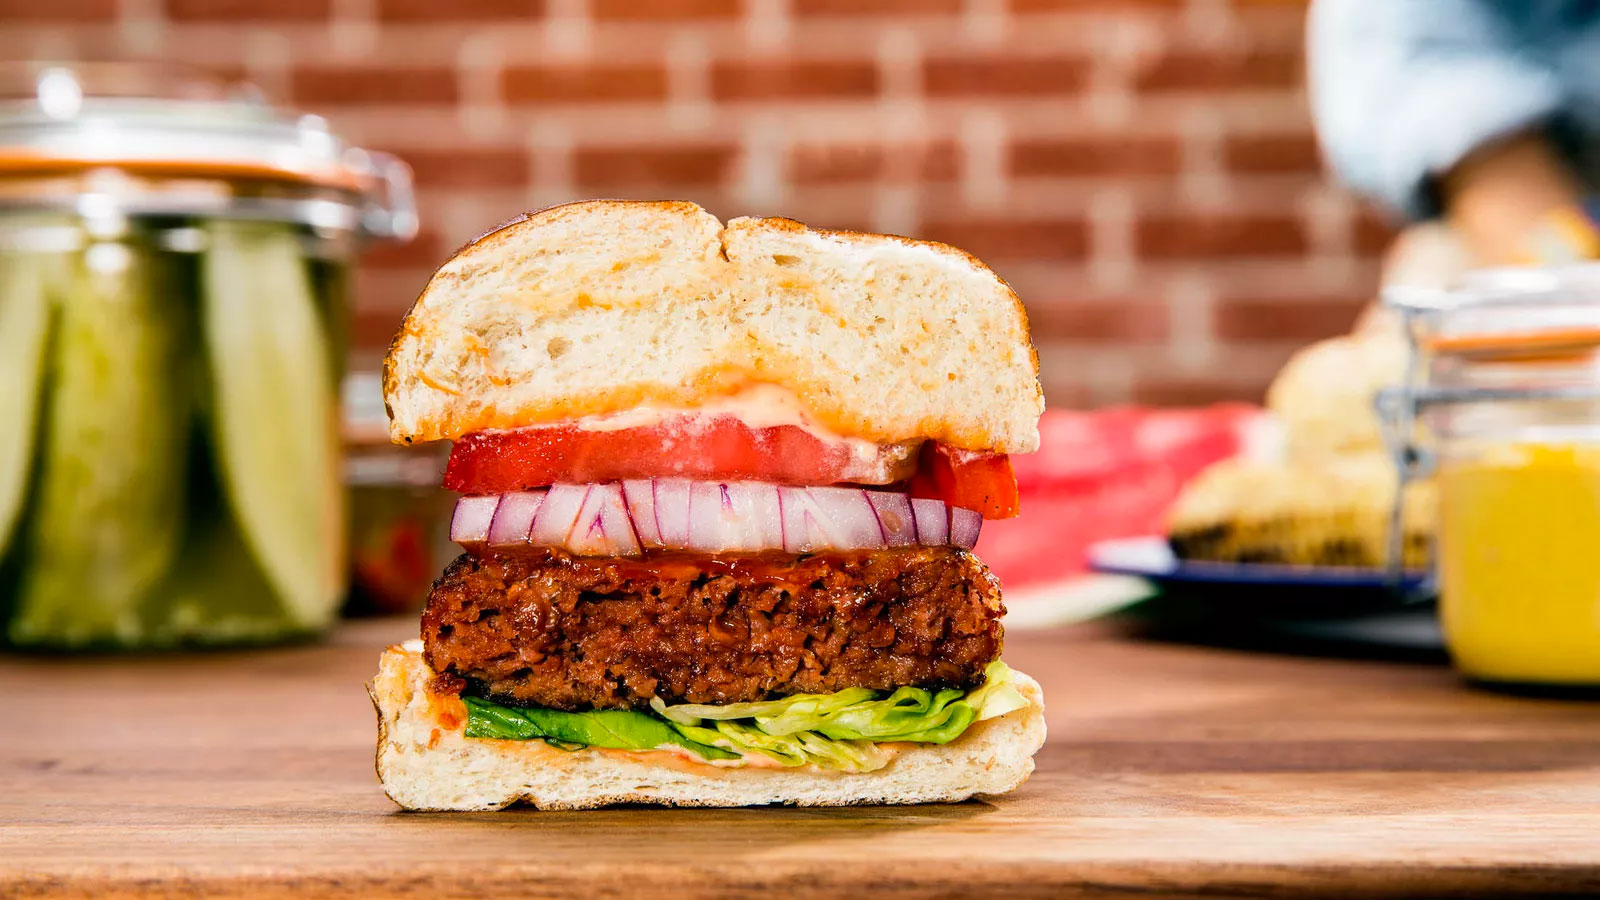 Say “Yum” Or “Yuck” to These Trendy Foods to Find Out What People Hate Most About You Beyond Meat Burger